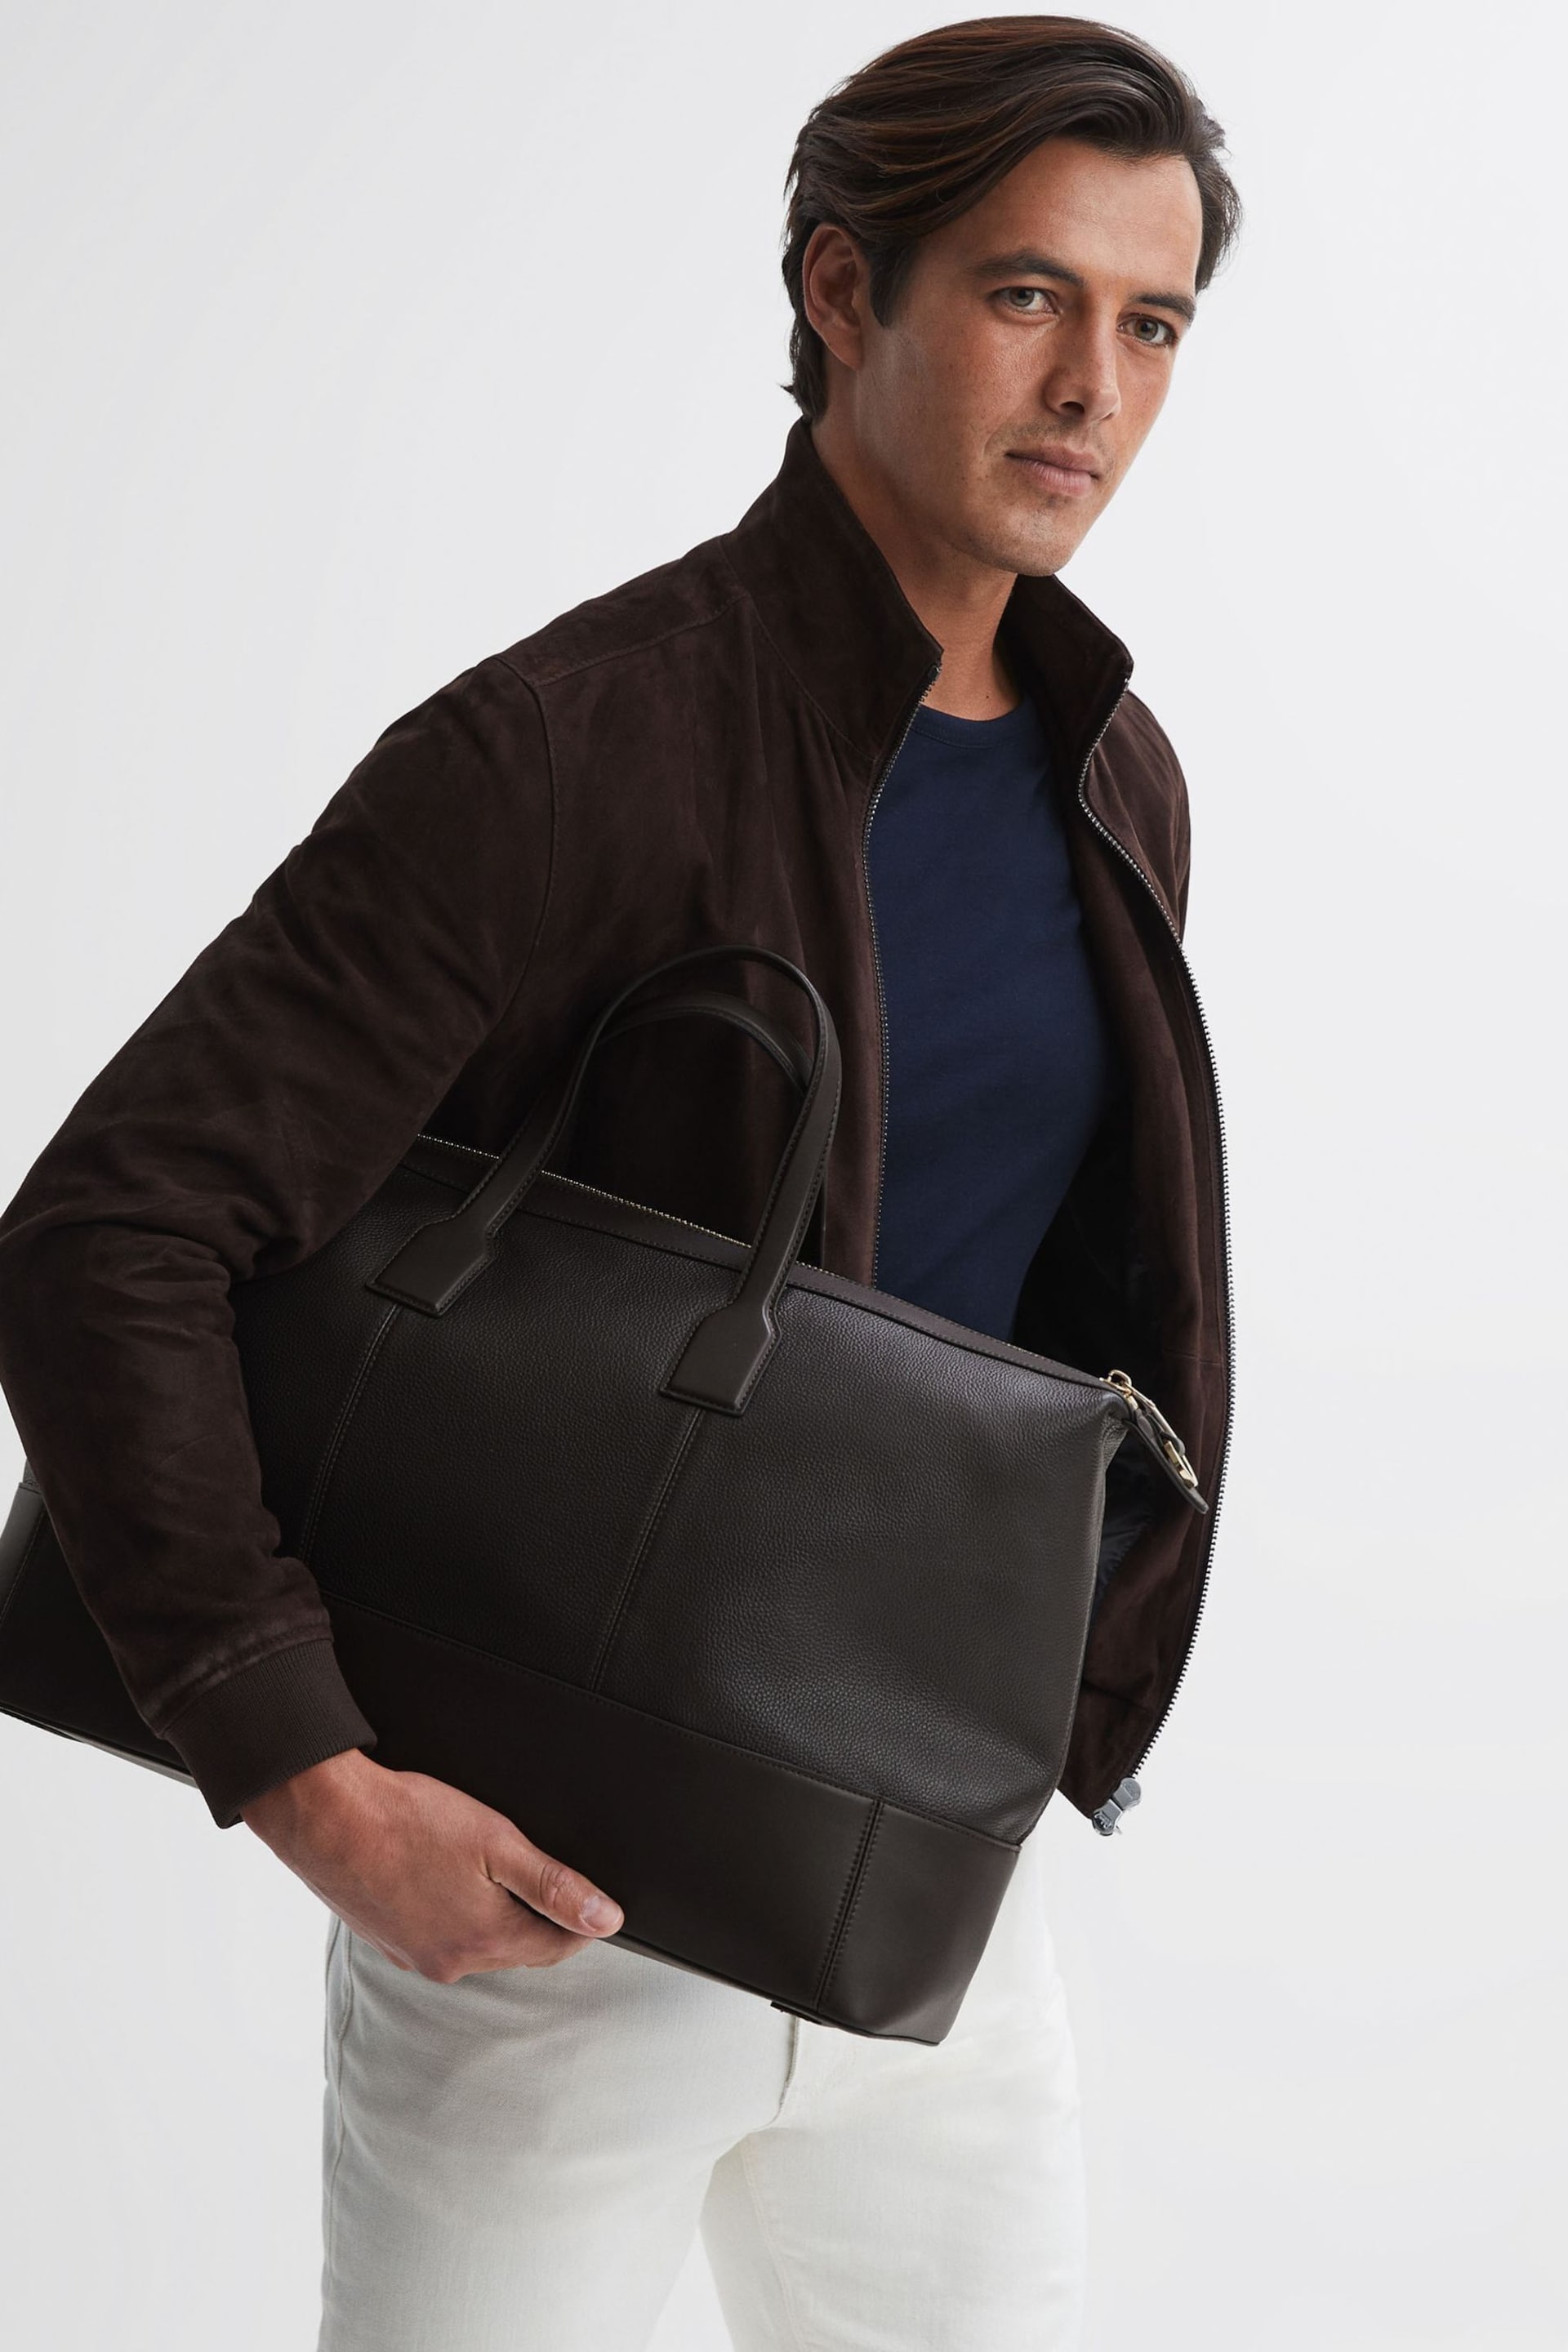 Reiss Chocolate Carter Leather Holdall - Image 2 of 5